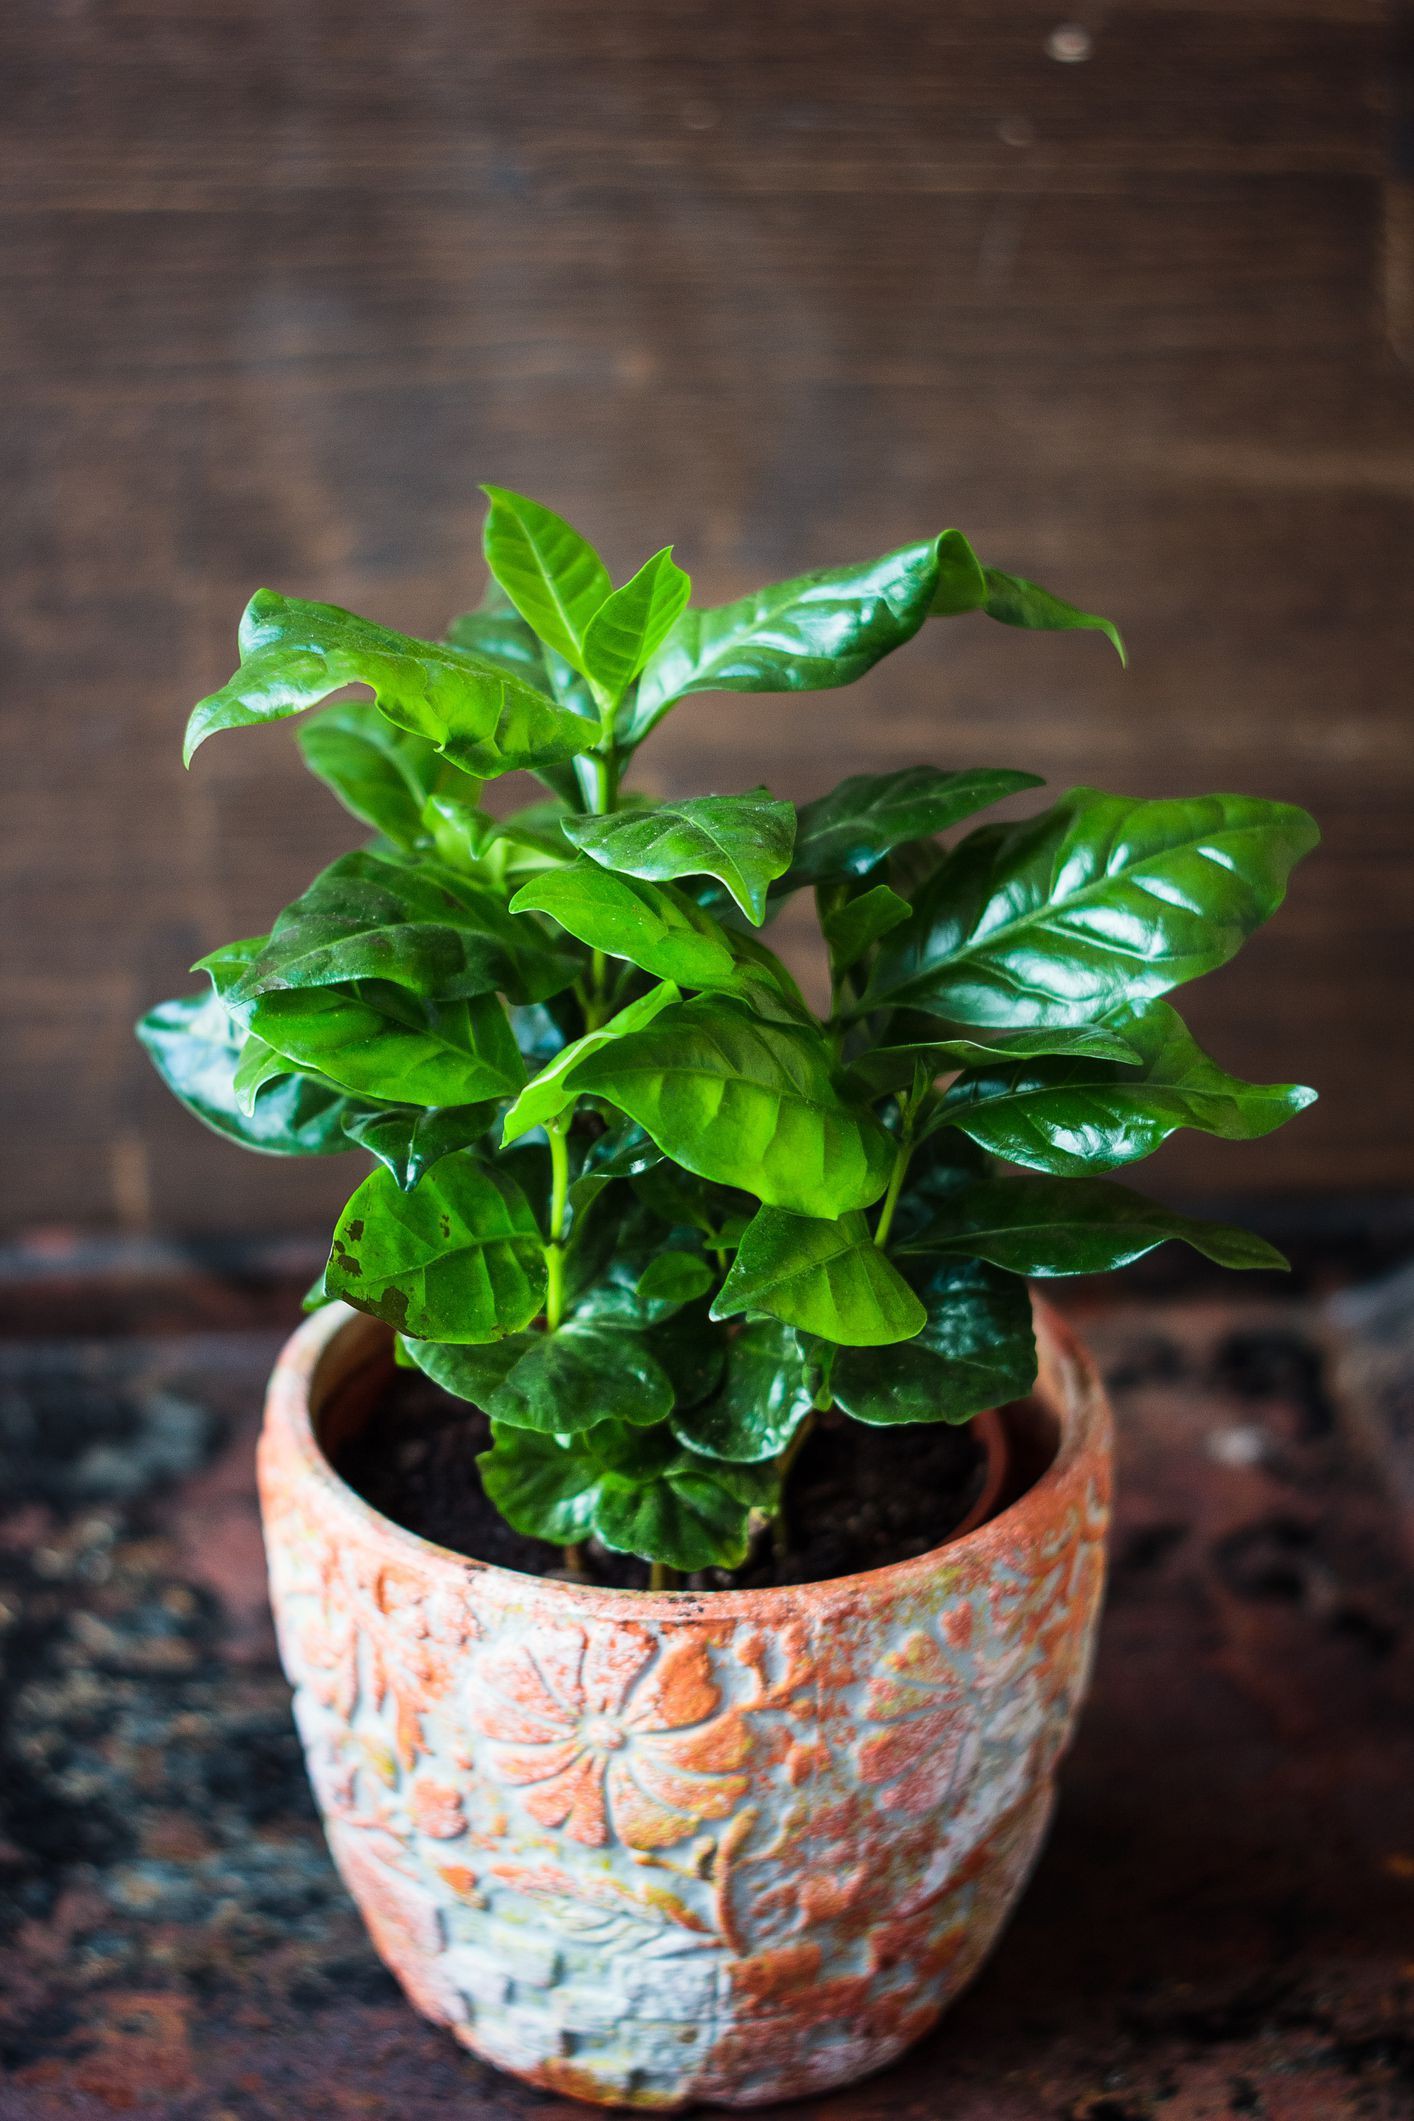 coffea-arabica-coffee-plant-in-a-flower-pot-royalty-free-image-909851626-1553277122